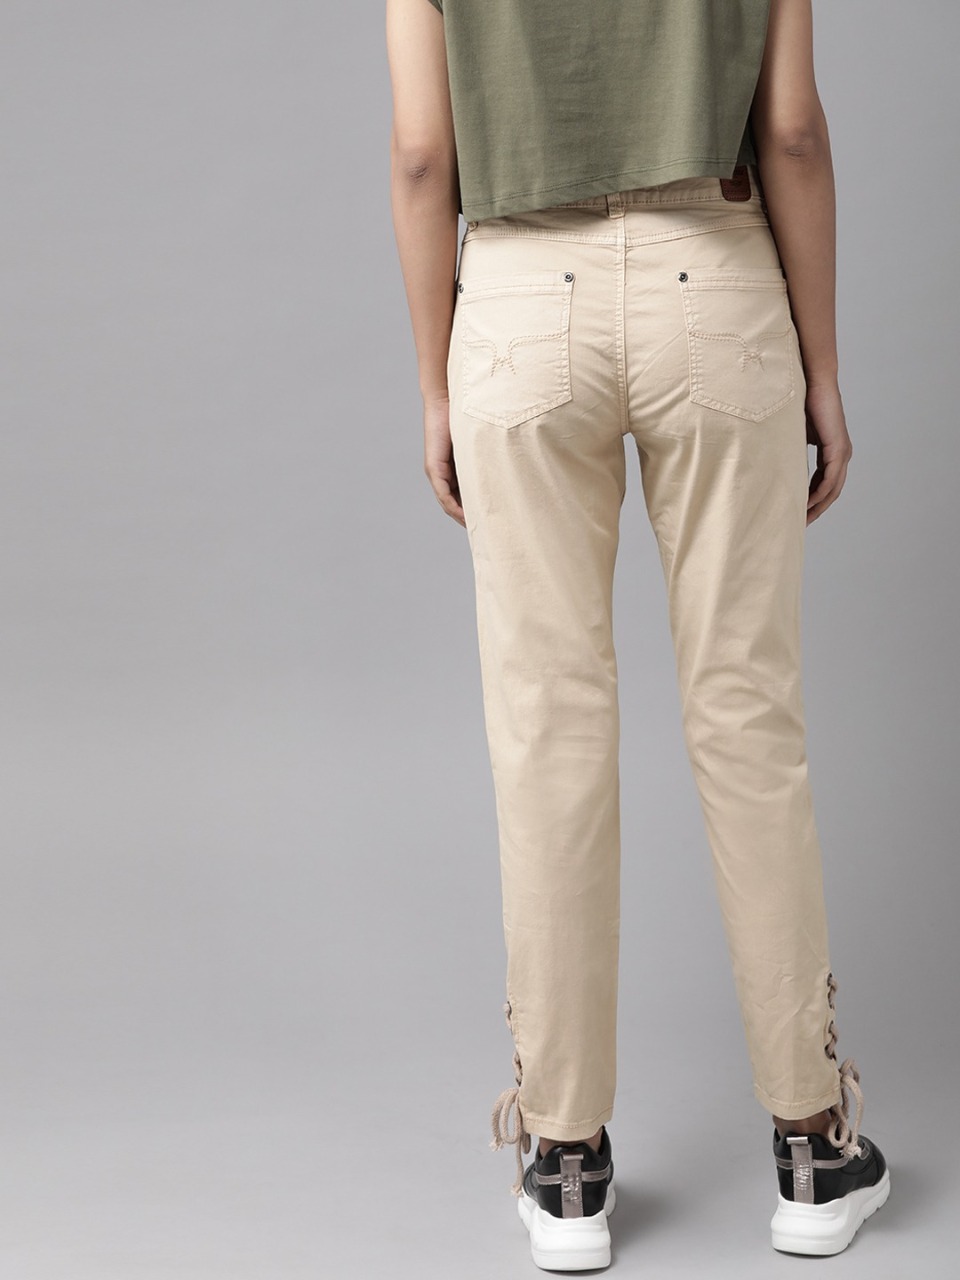 Uth By Roadster Trousers - Buy Uth By Roadster Trousers online in India